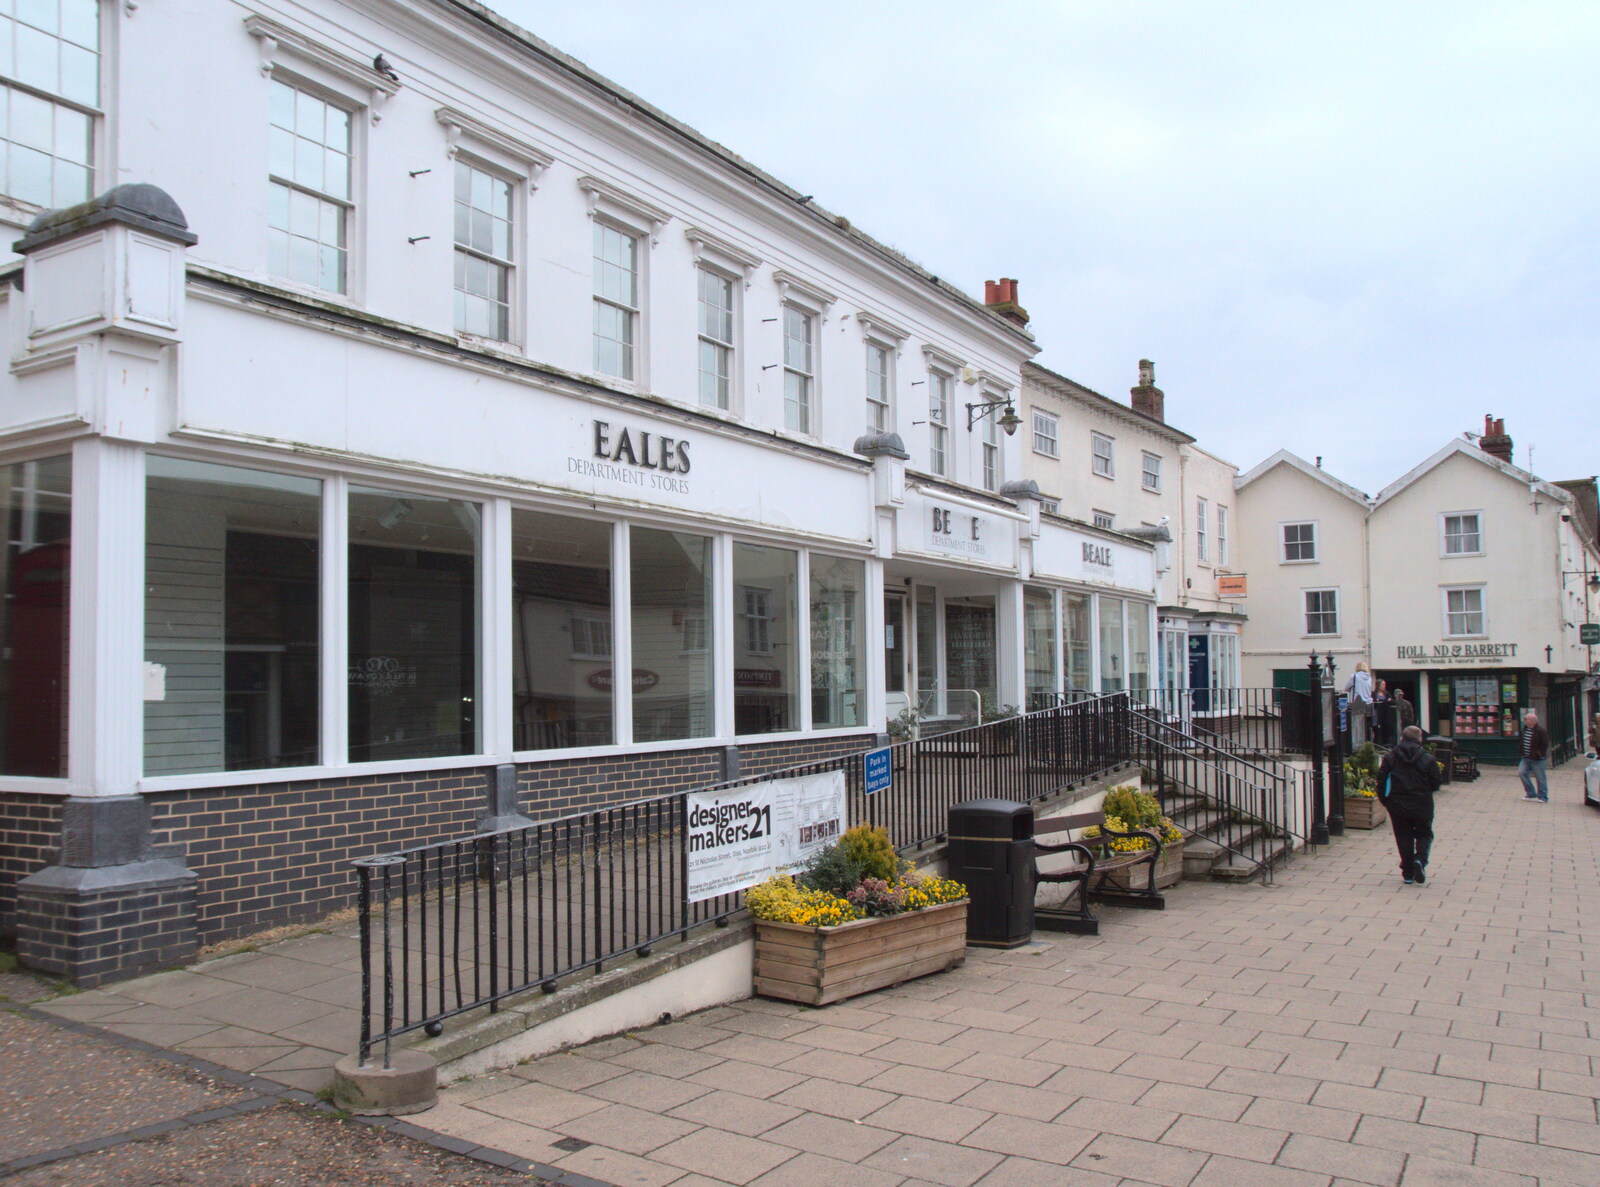 The closed-down Beales from The Lockdown Desertion of Diss, and a Bike Ride up the Avenue, Brome - 19th April 2020